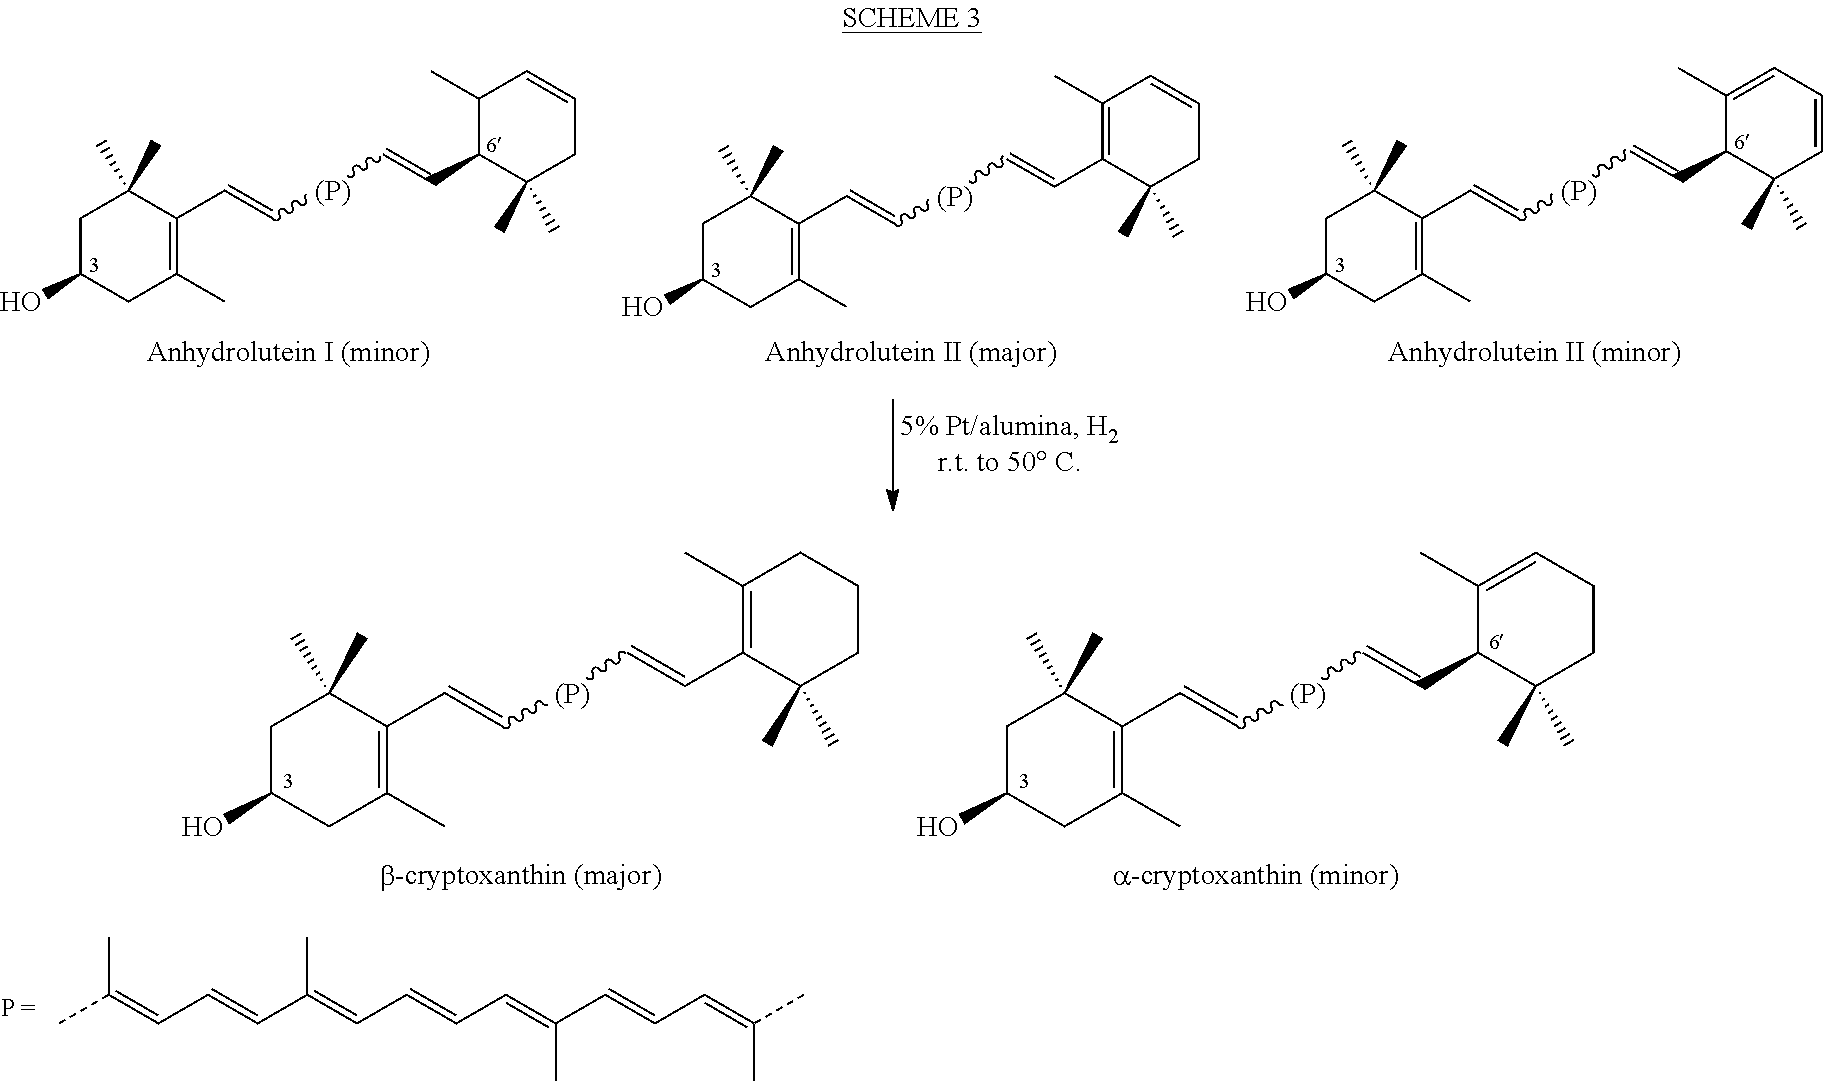 Process for a direct one-pot transformation of lutein to beta-cryptoxanthin via its acetate ester